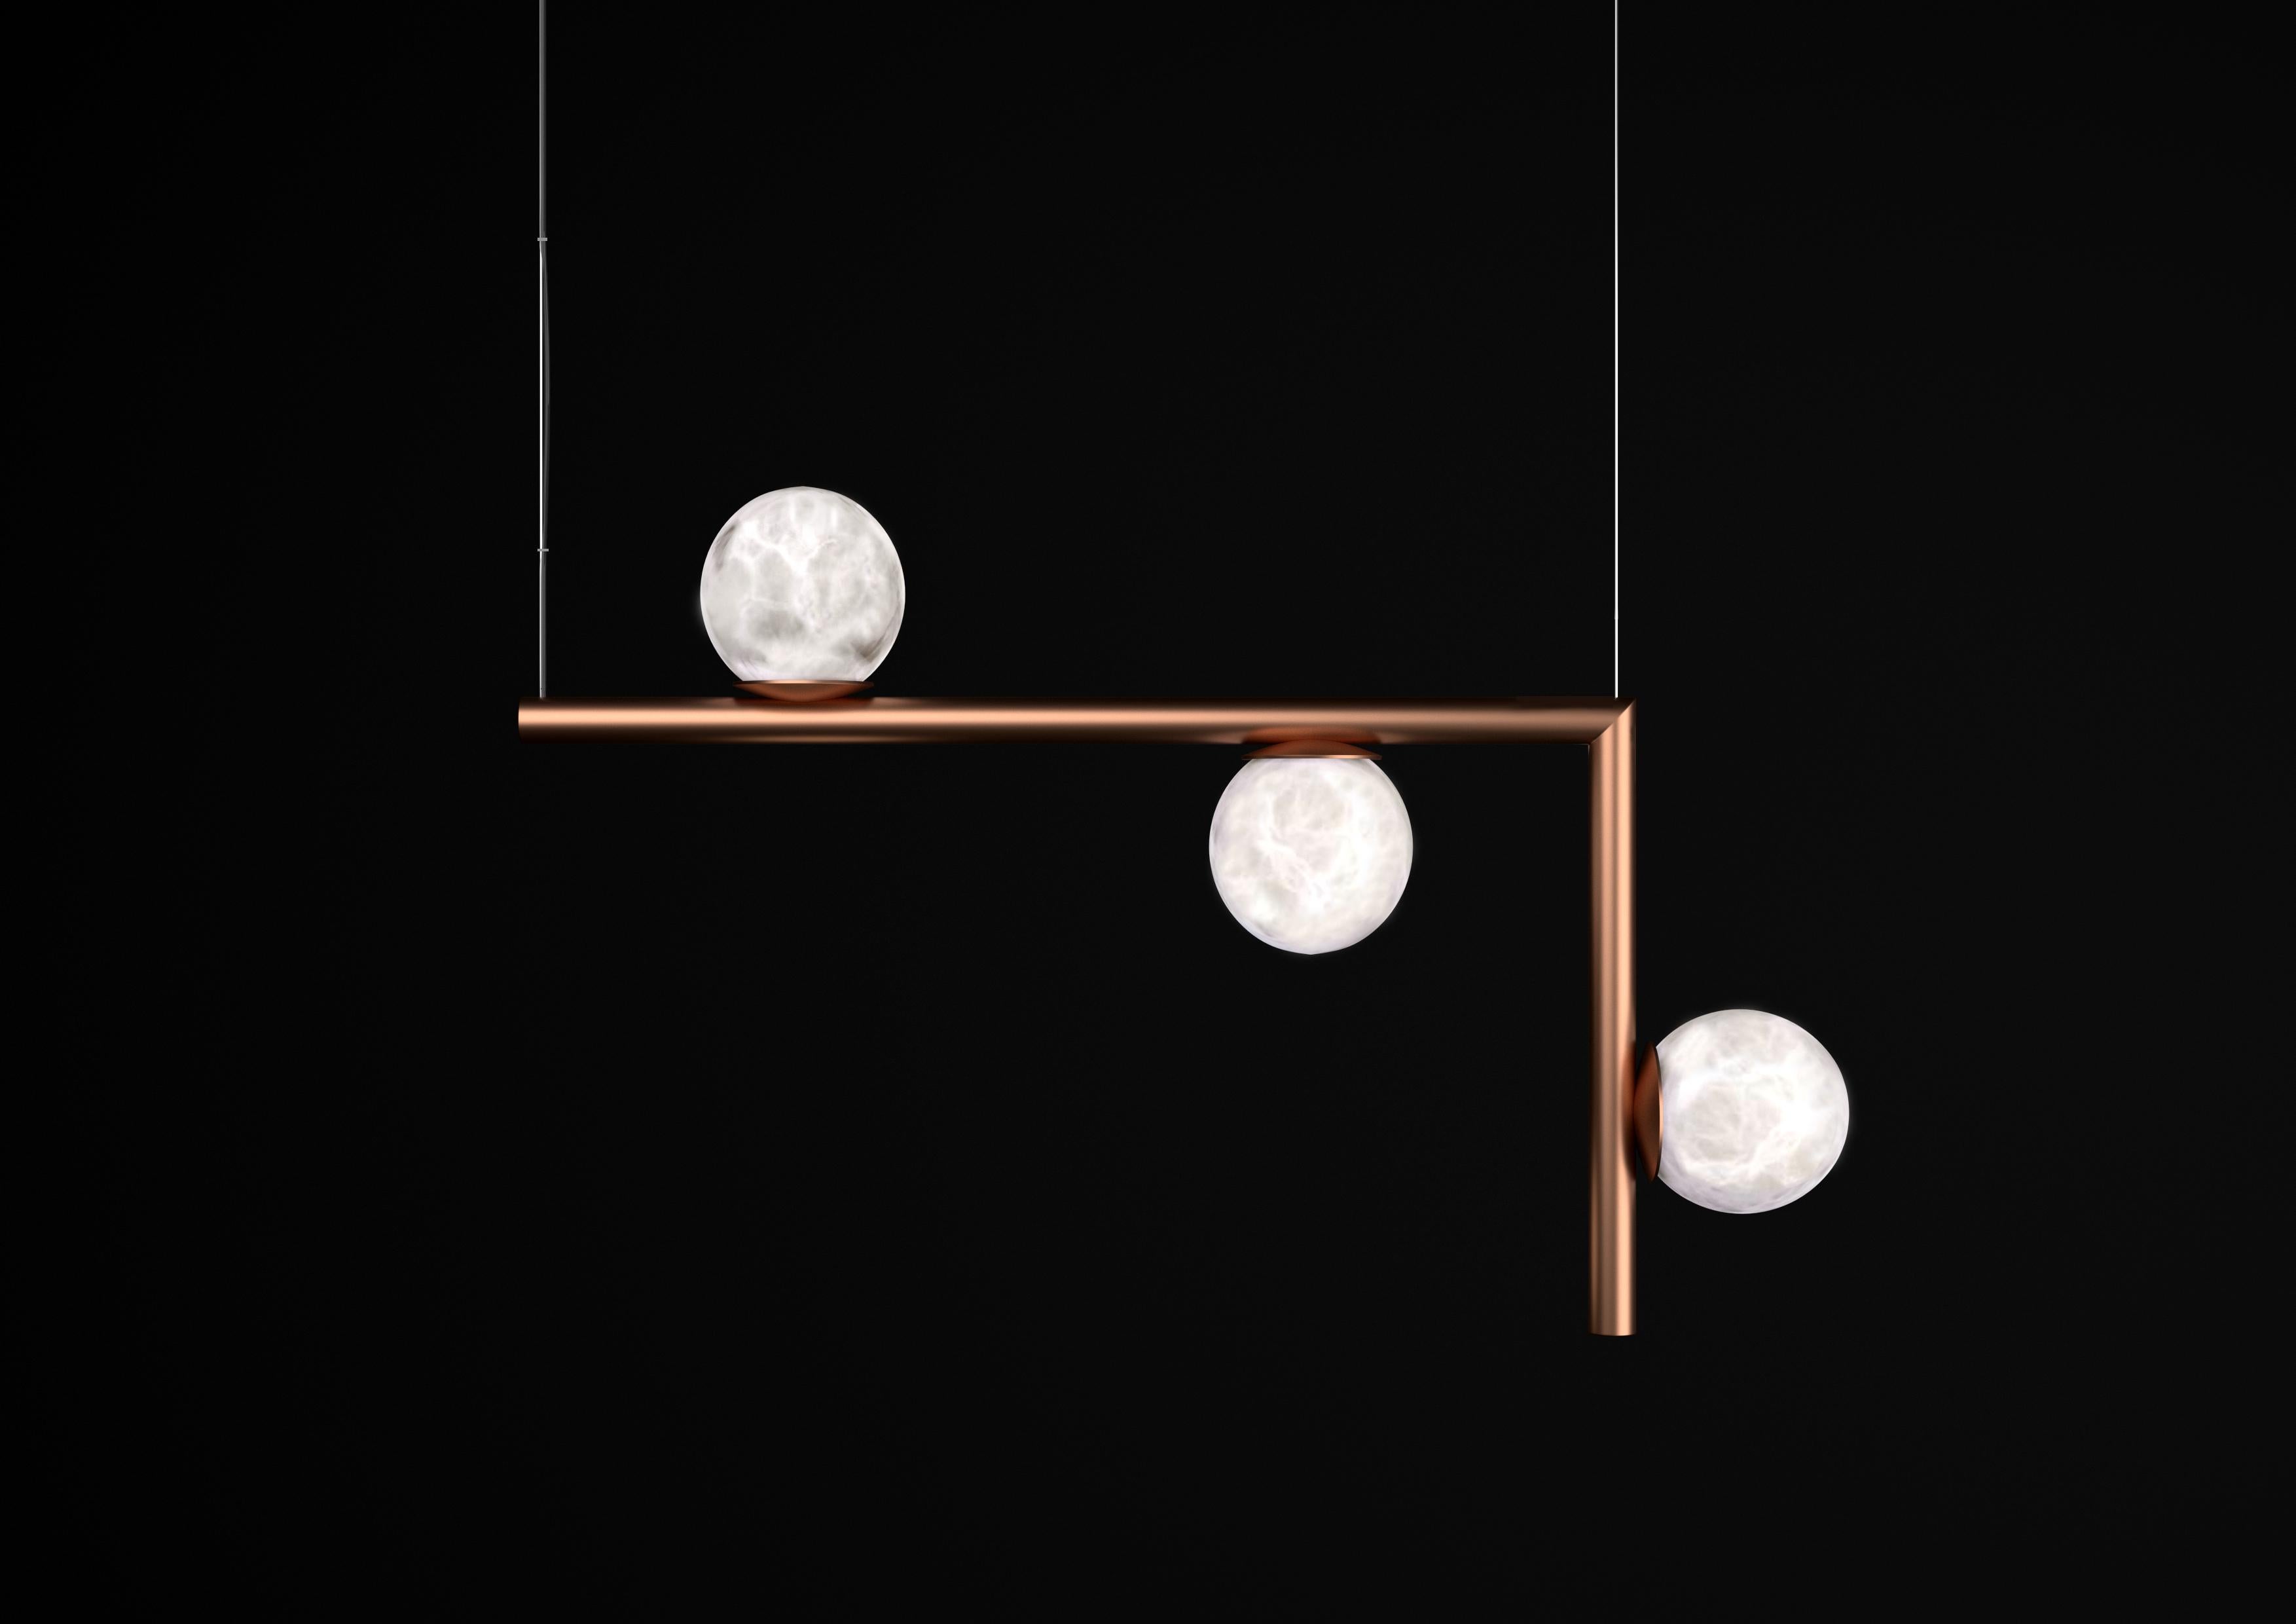 Ofione 2 Copper Pendant Lamp by Alabastro Italiano
Dimensions: D 14 x W 85 x H 55 cm.
Materials: White alabaster and copper.

Available in different finishes: Shiny Silver, Bronze, Brushed Brass, Ruggine of Florence, Brushed Burnished, Shiny Gold,